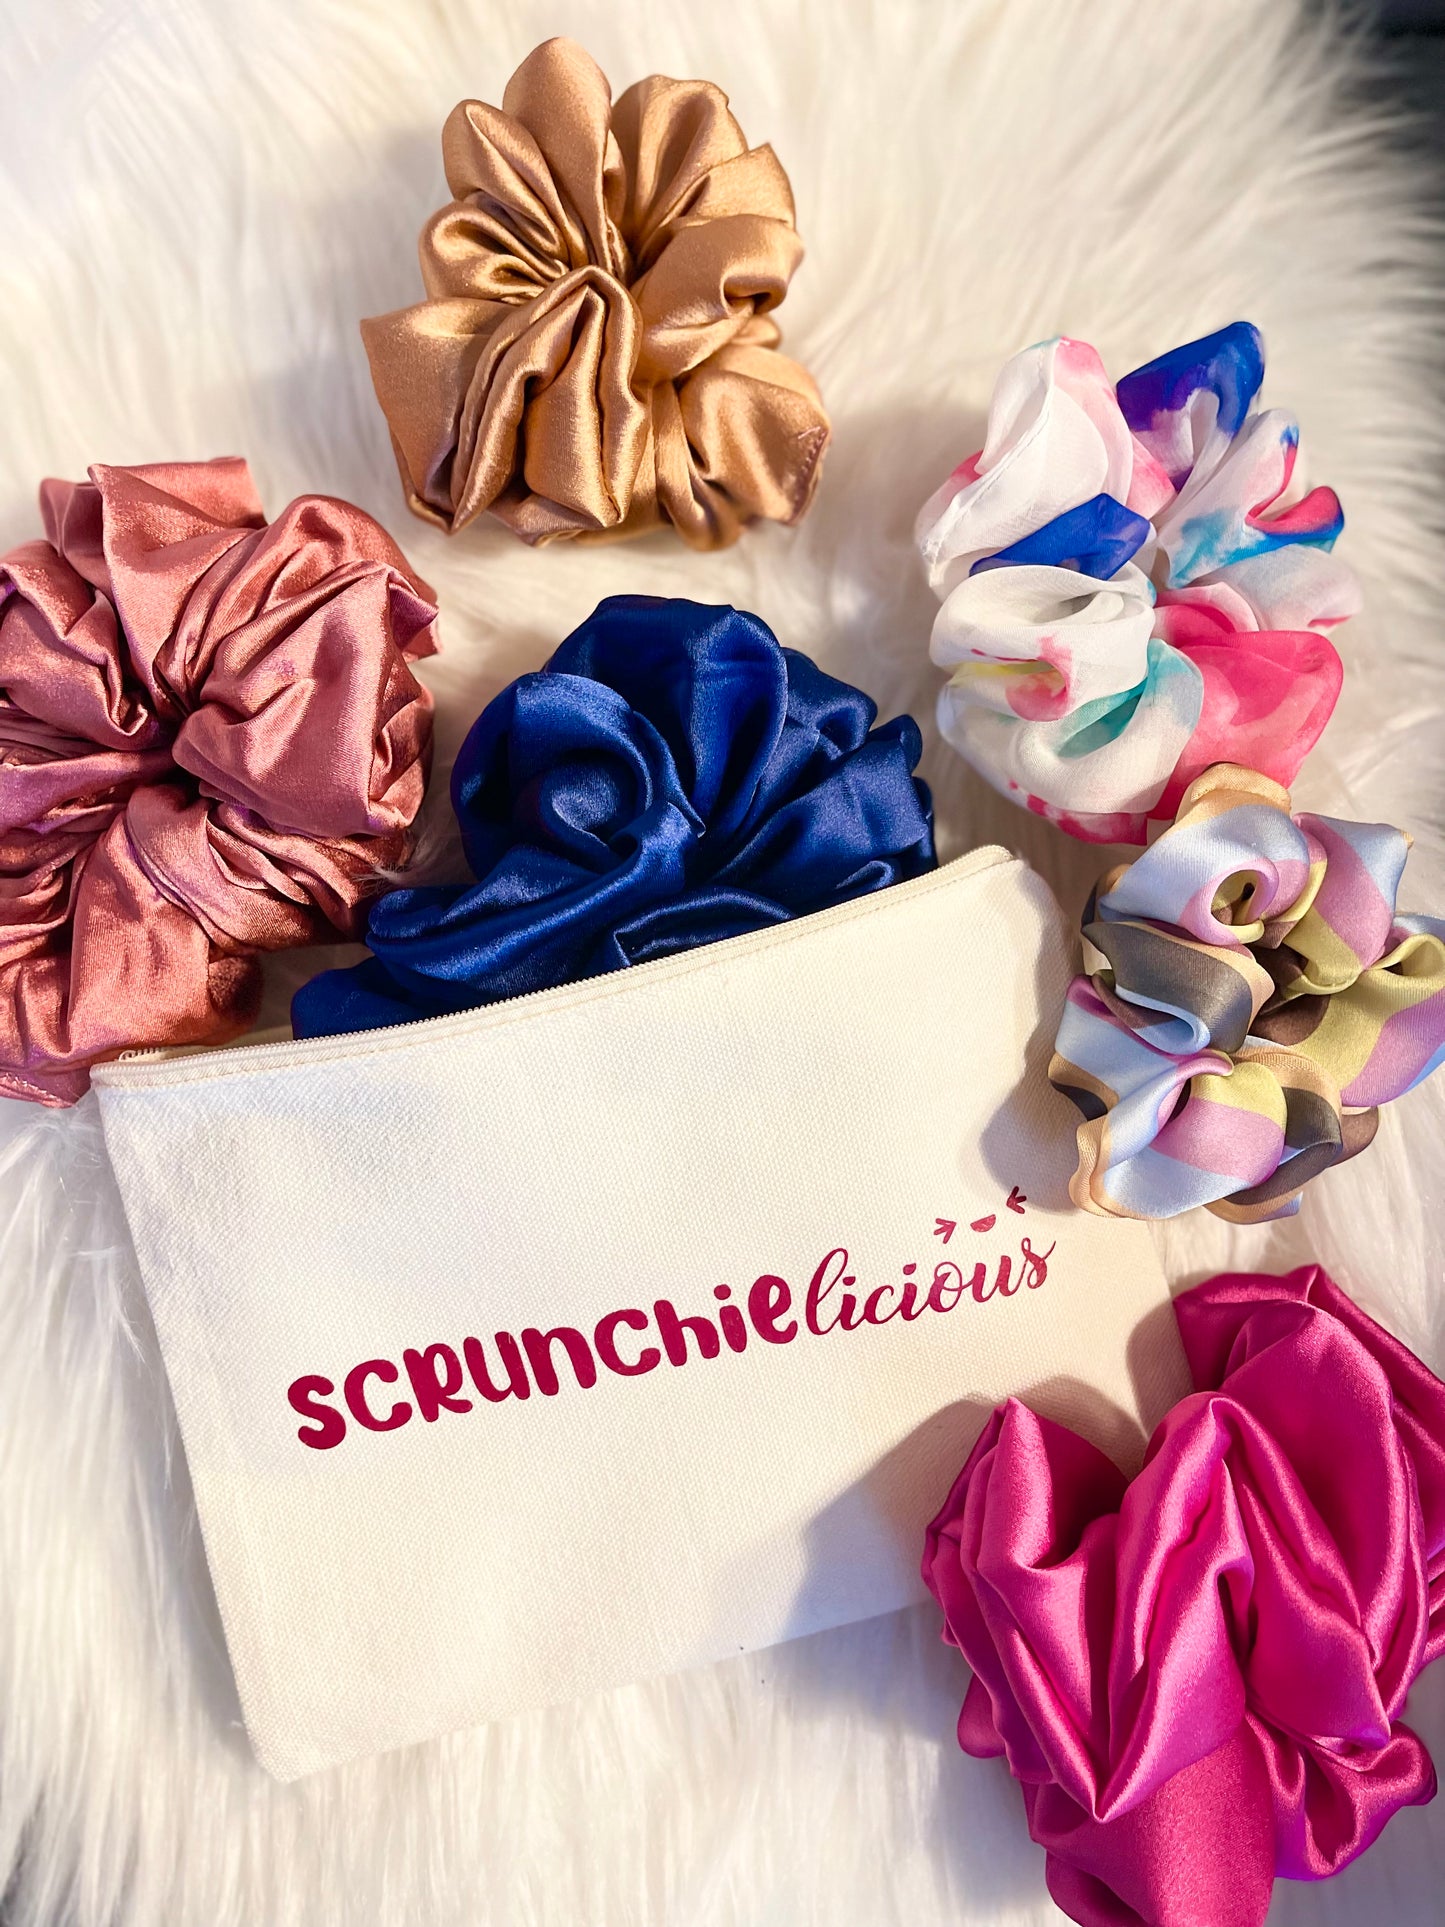 Cute scrunchies cosmetic, make up, stationary, bag with zipper and tassle